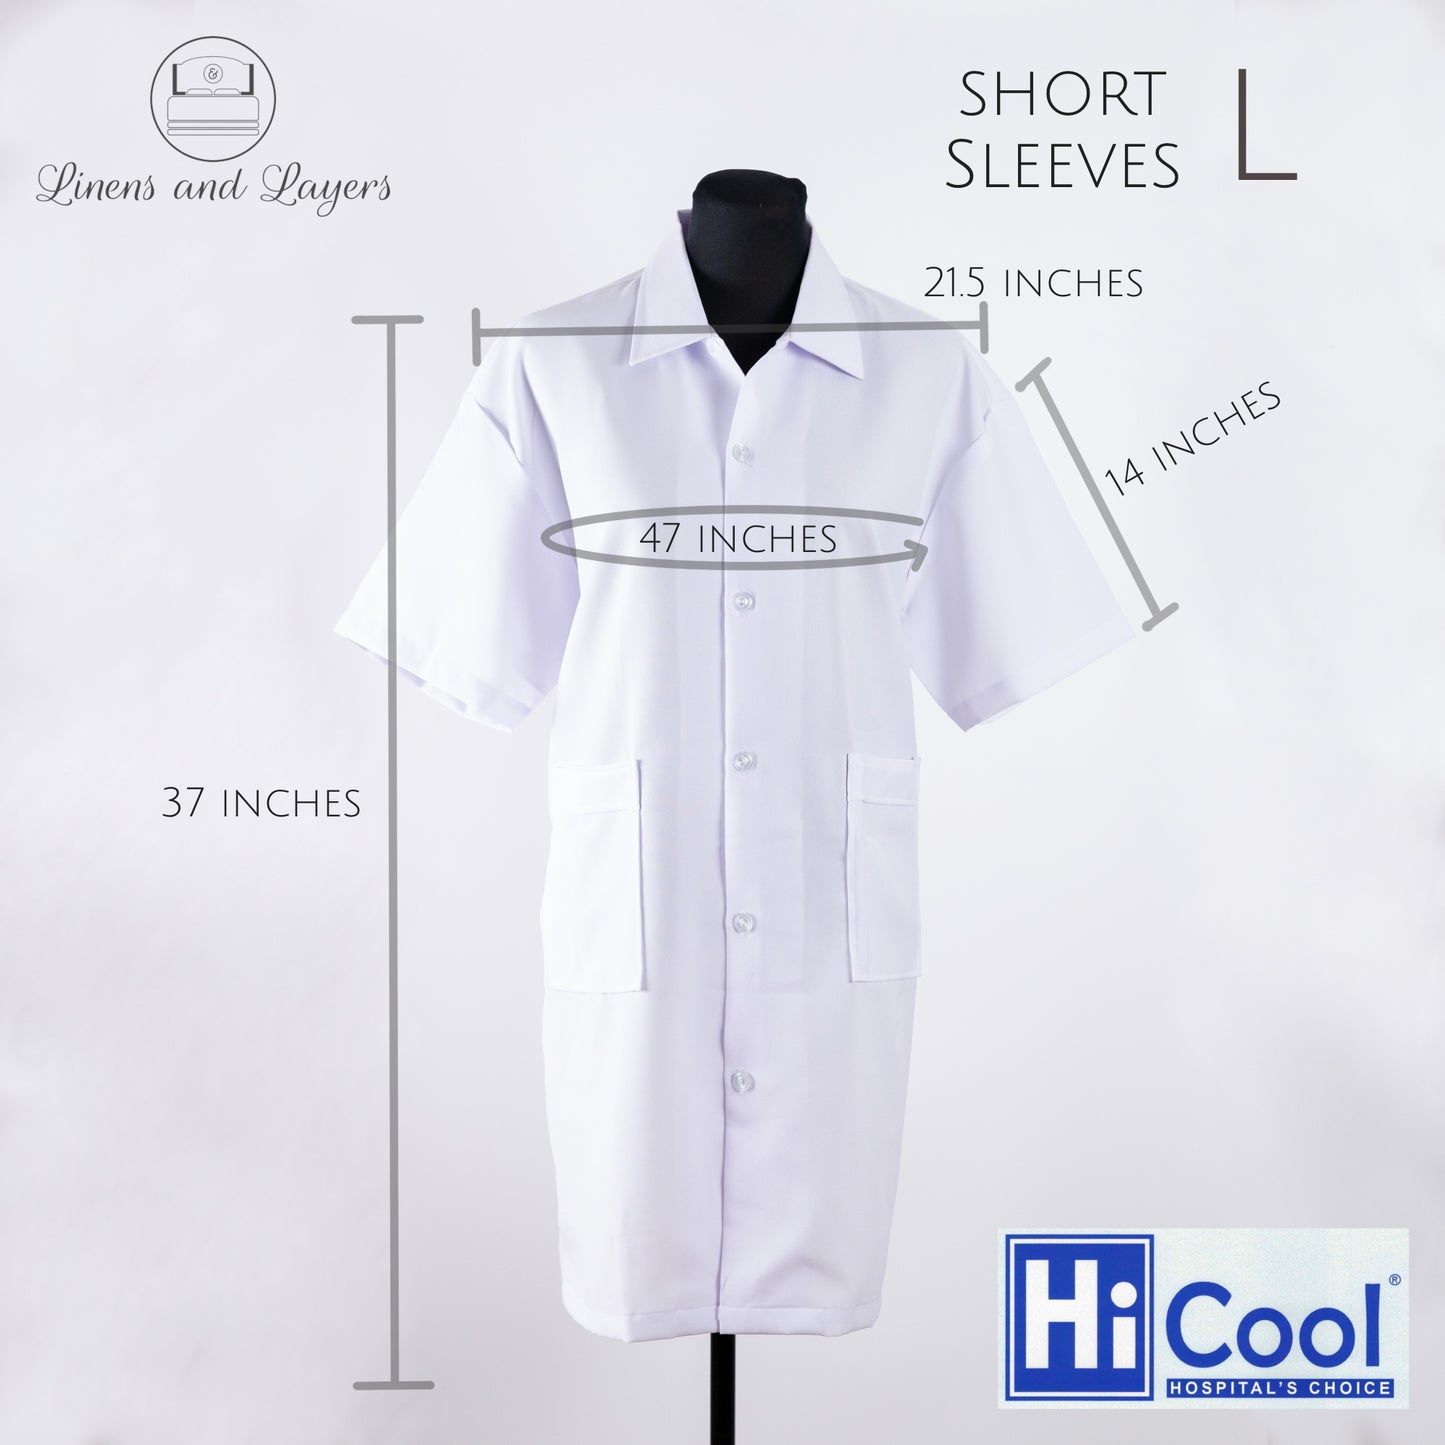 Hi Cool White Unisex Laboratory Coat / Gown for Adult